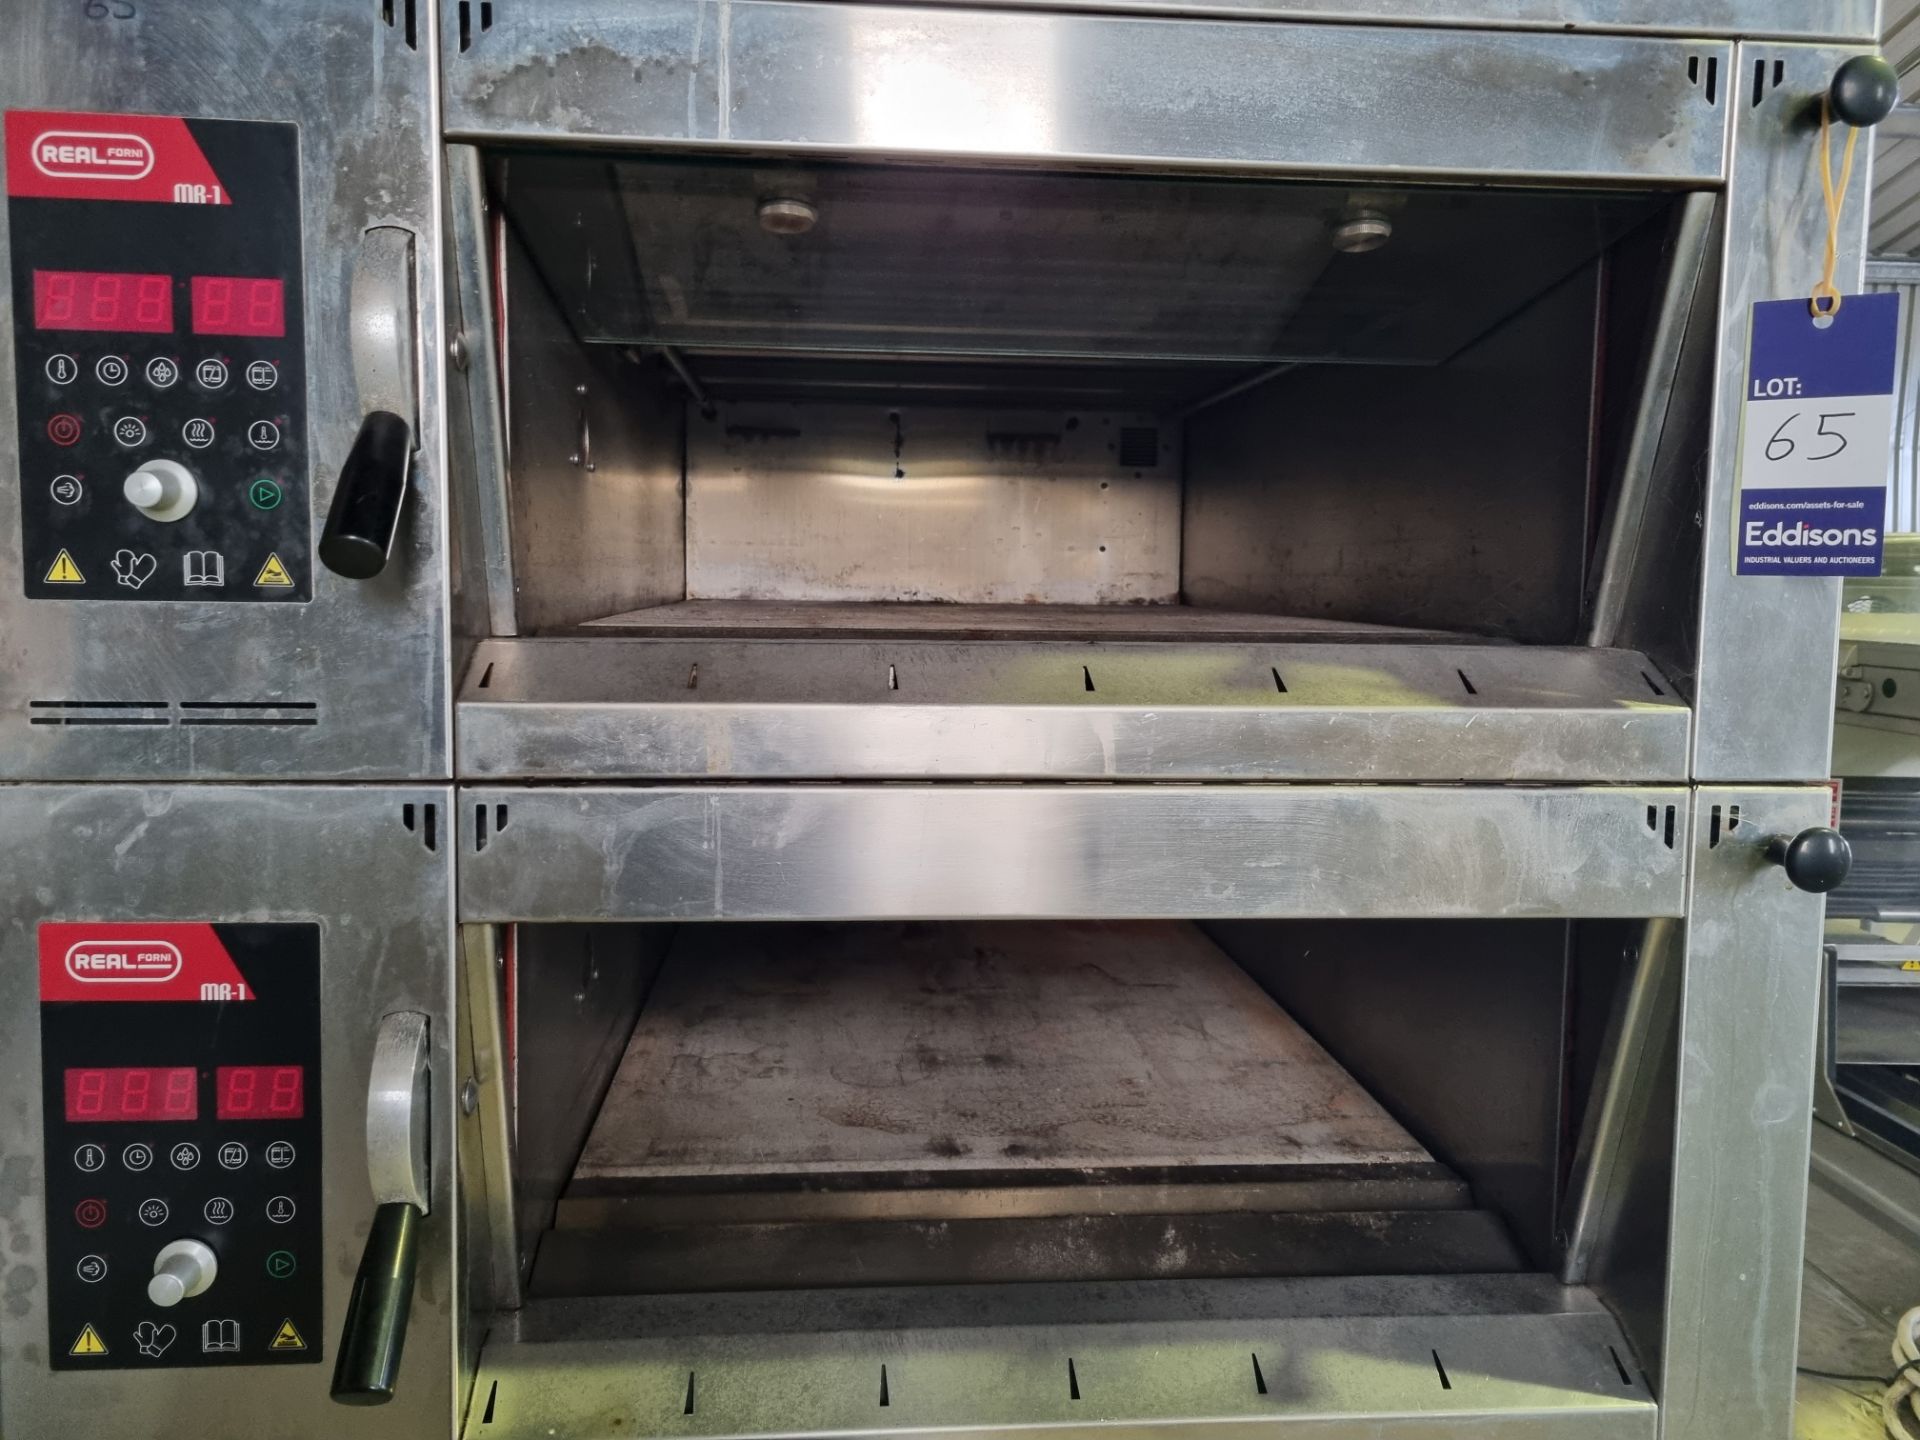 2015 Real Forni Electric Model LS85 MR-1 Oven. Twin door cooling cabinet below. 600 x 800 x 200 mm - Image 2 of 8